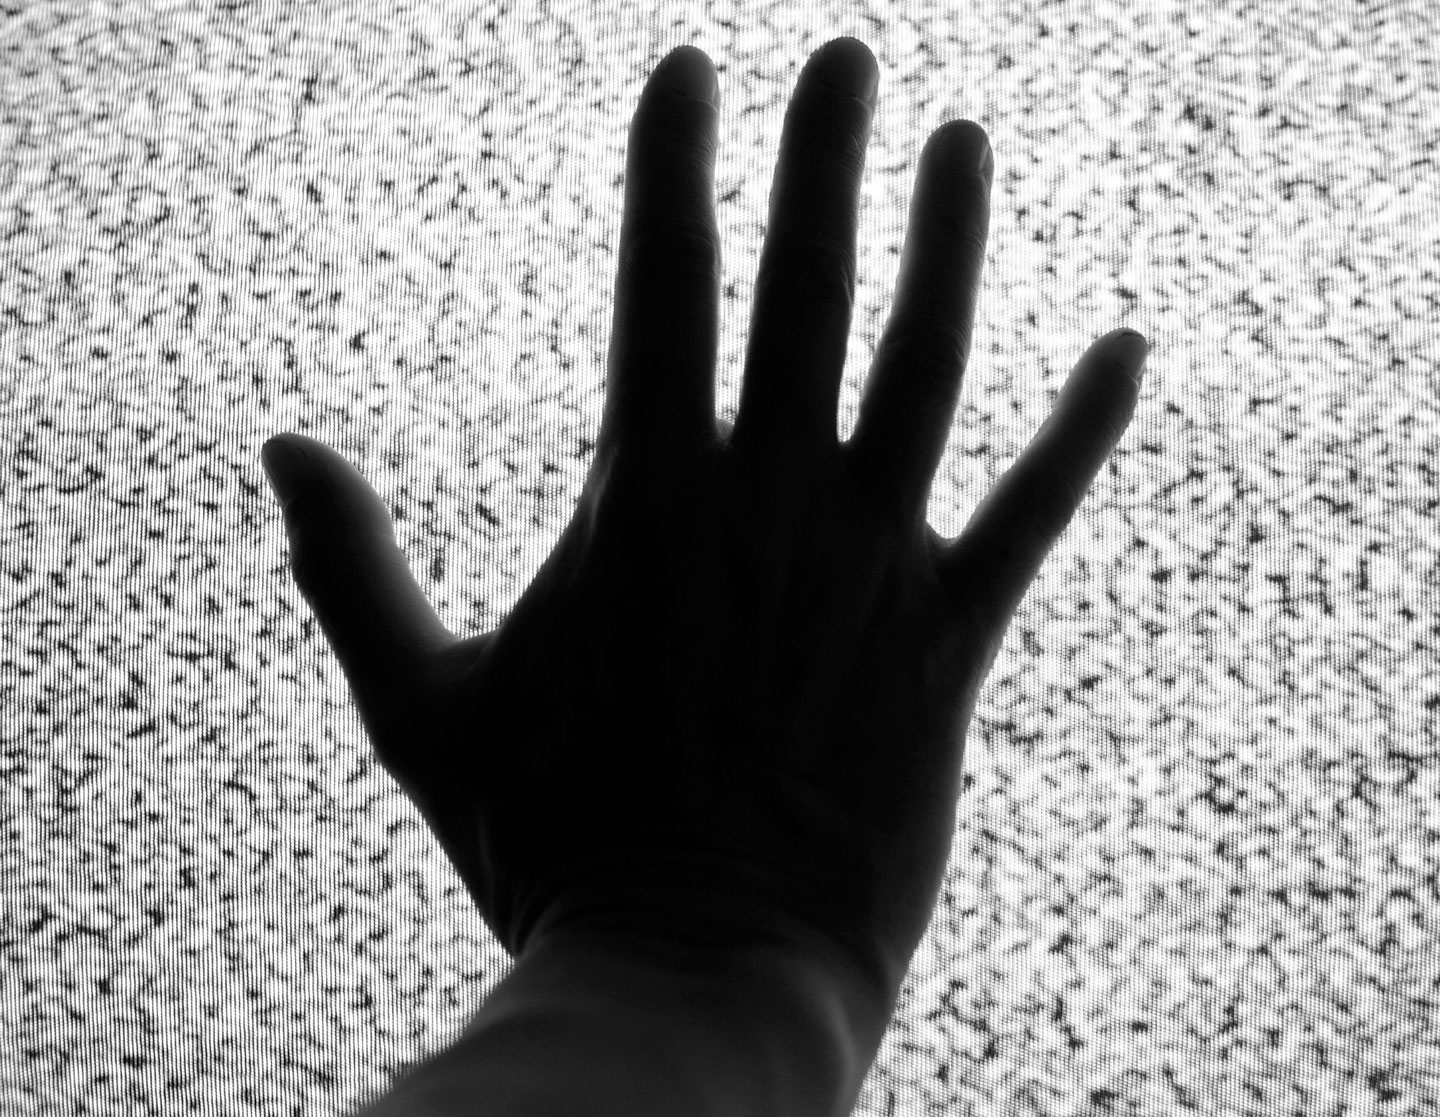 A silhouette of a hand presses against a staticky TV screen